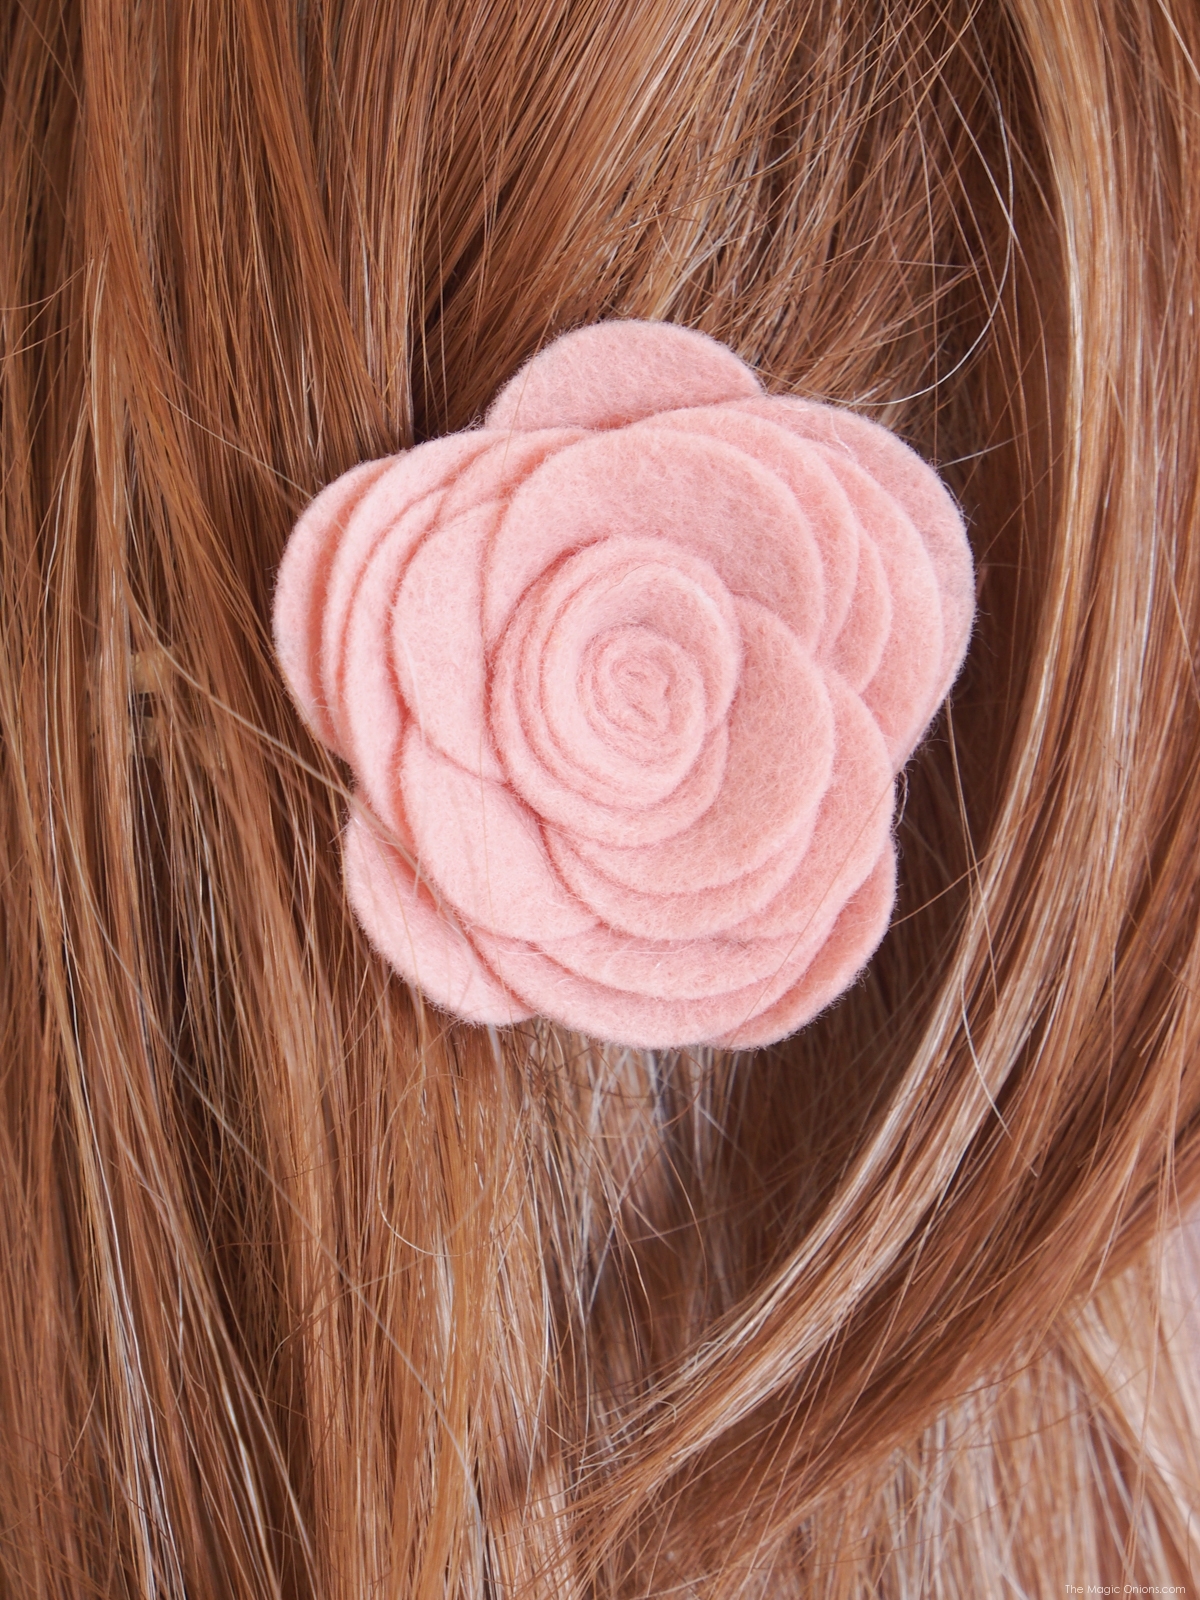 Make DIY Felt Flower Hair Clips for Spring with The Magic Onions Blog